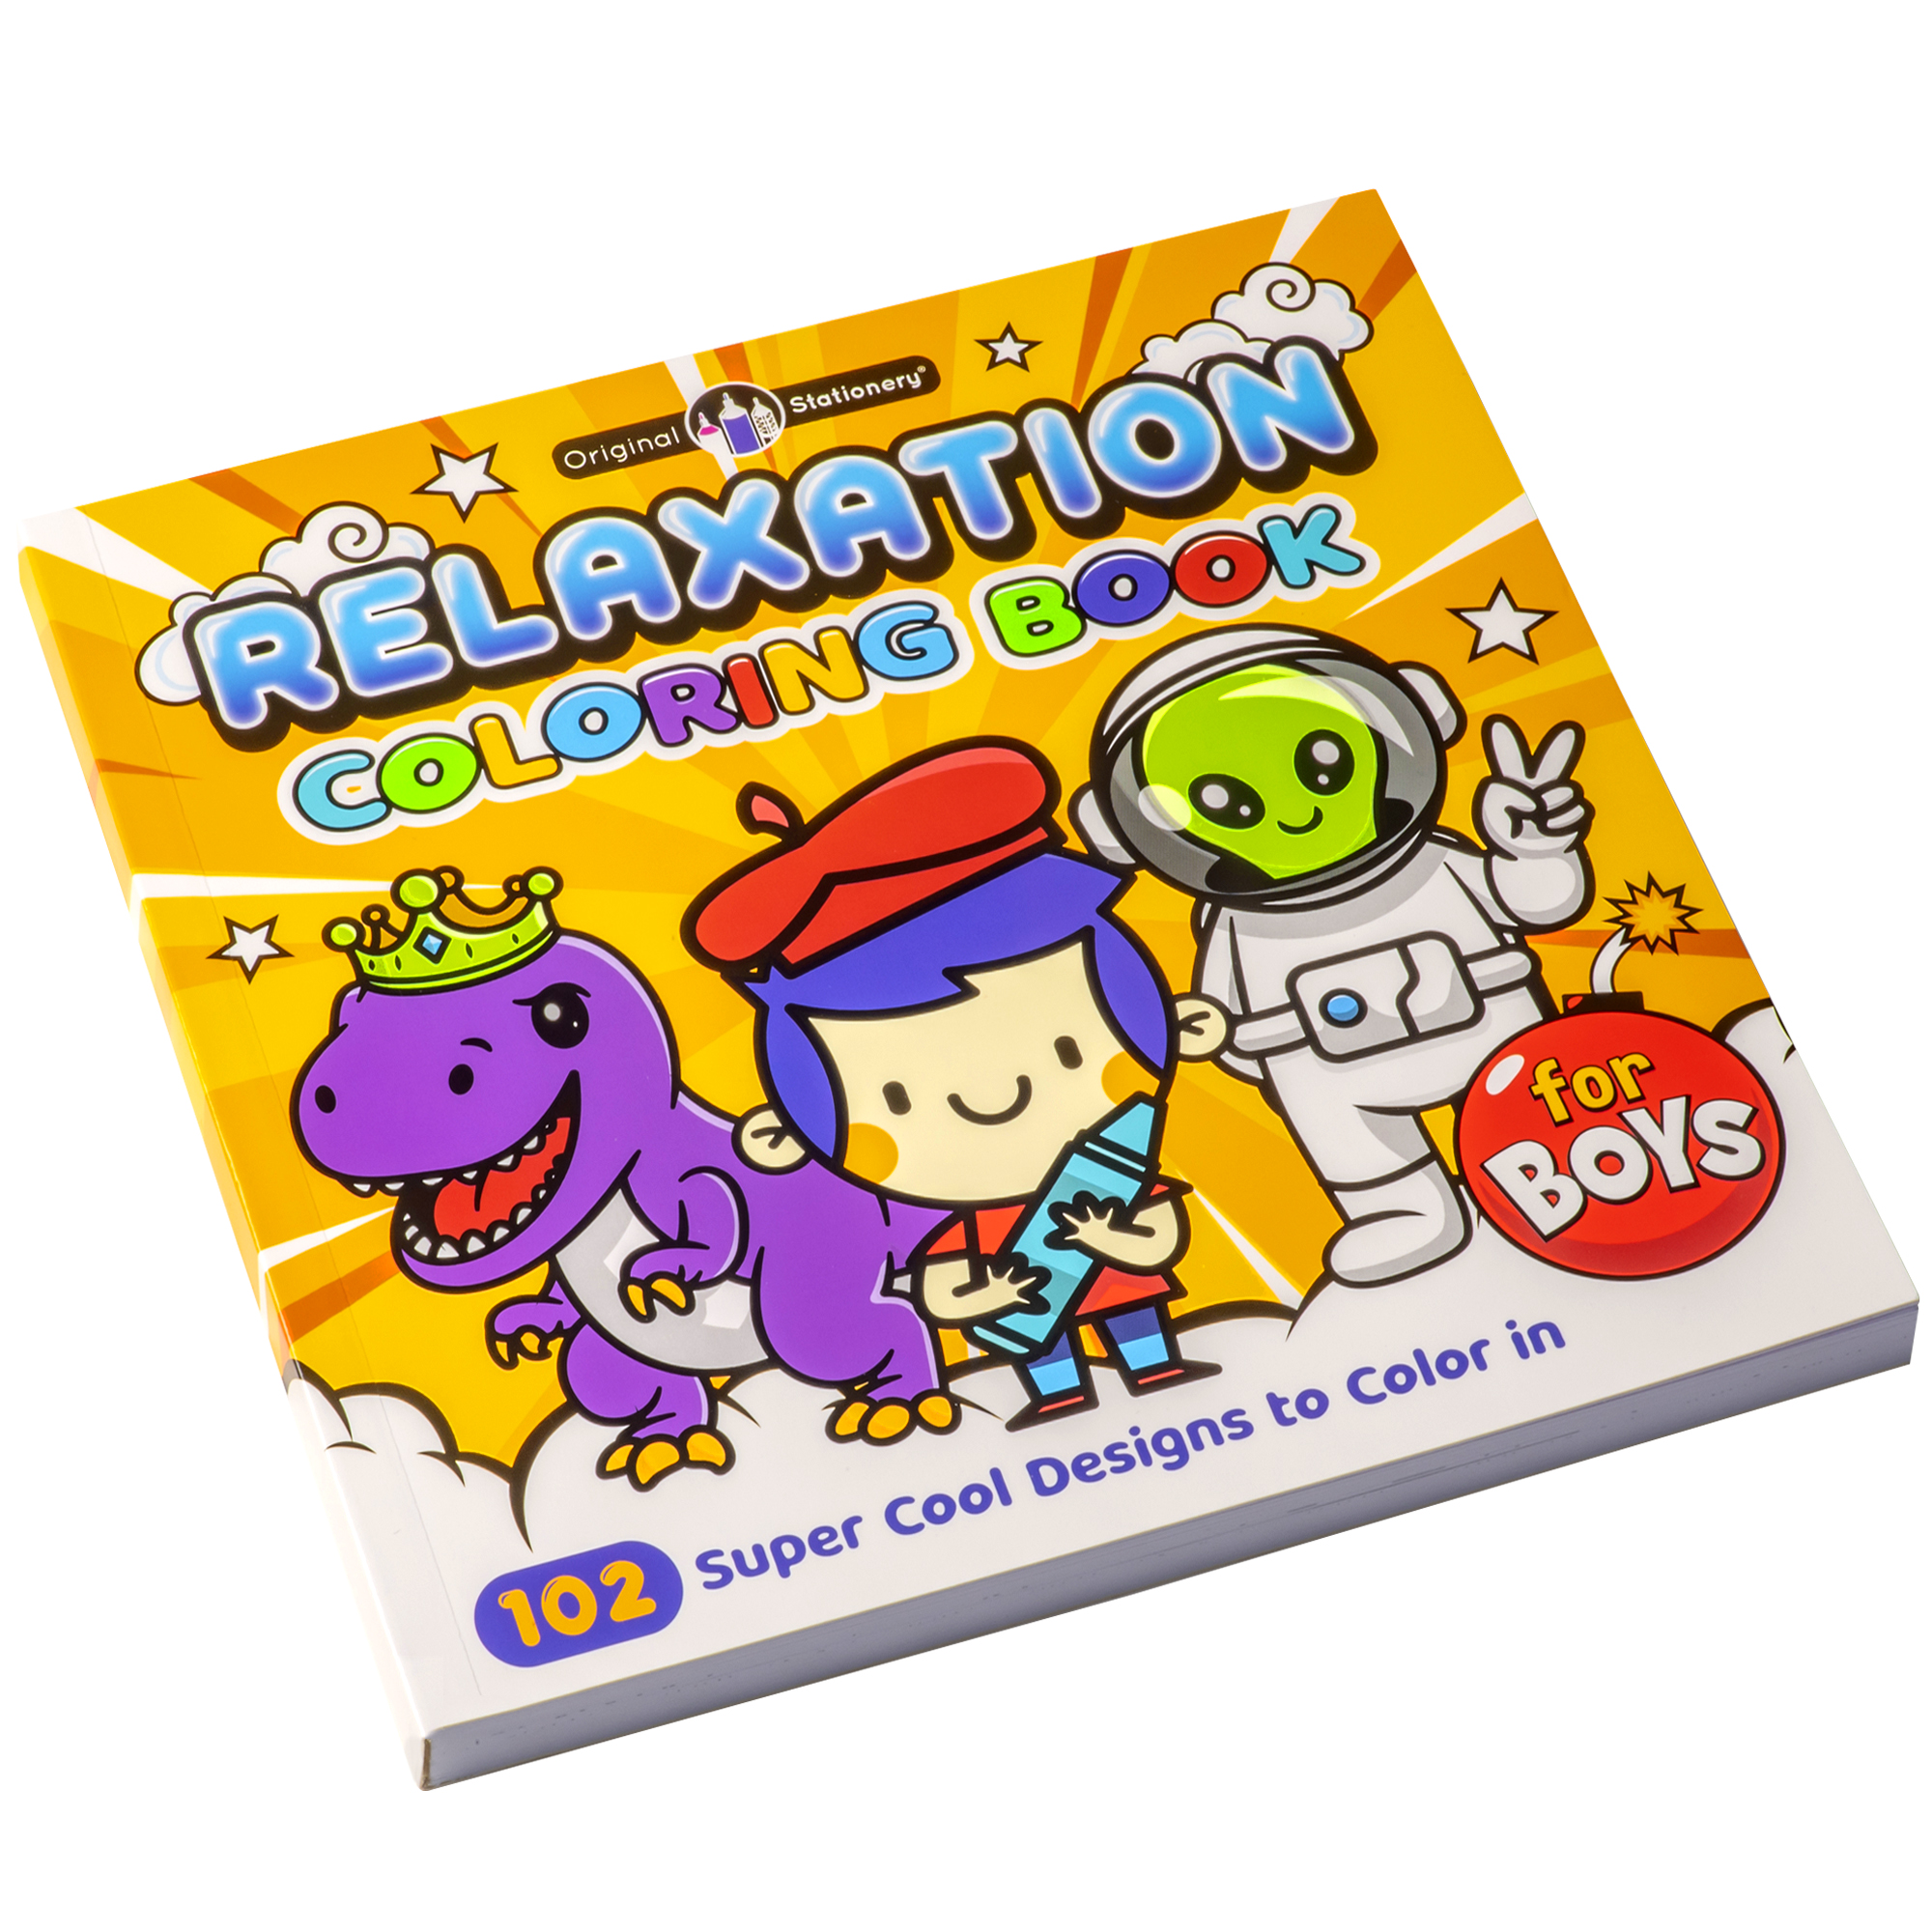 Original Stationery Arts and Crafts Relaxation Coloring Books for kids ages  4-8 with 102 Pages to Color in, Half an Inch Thick, Great Coloring Books